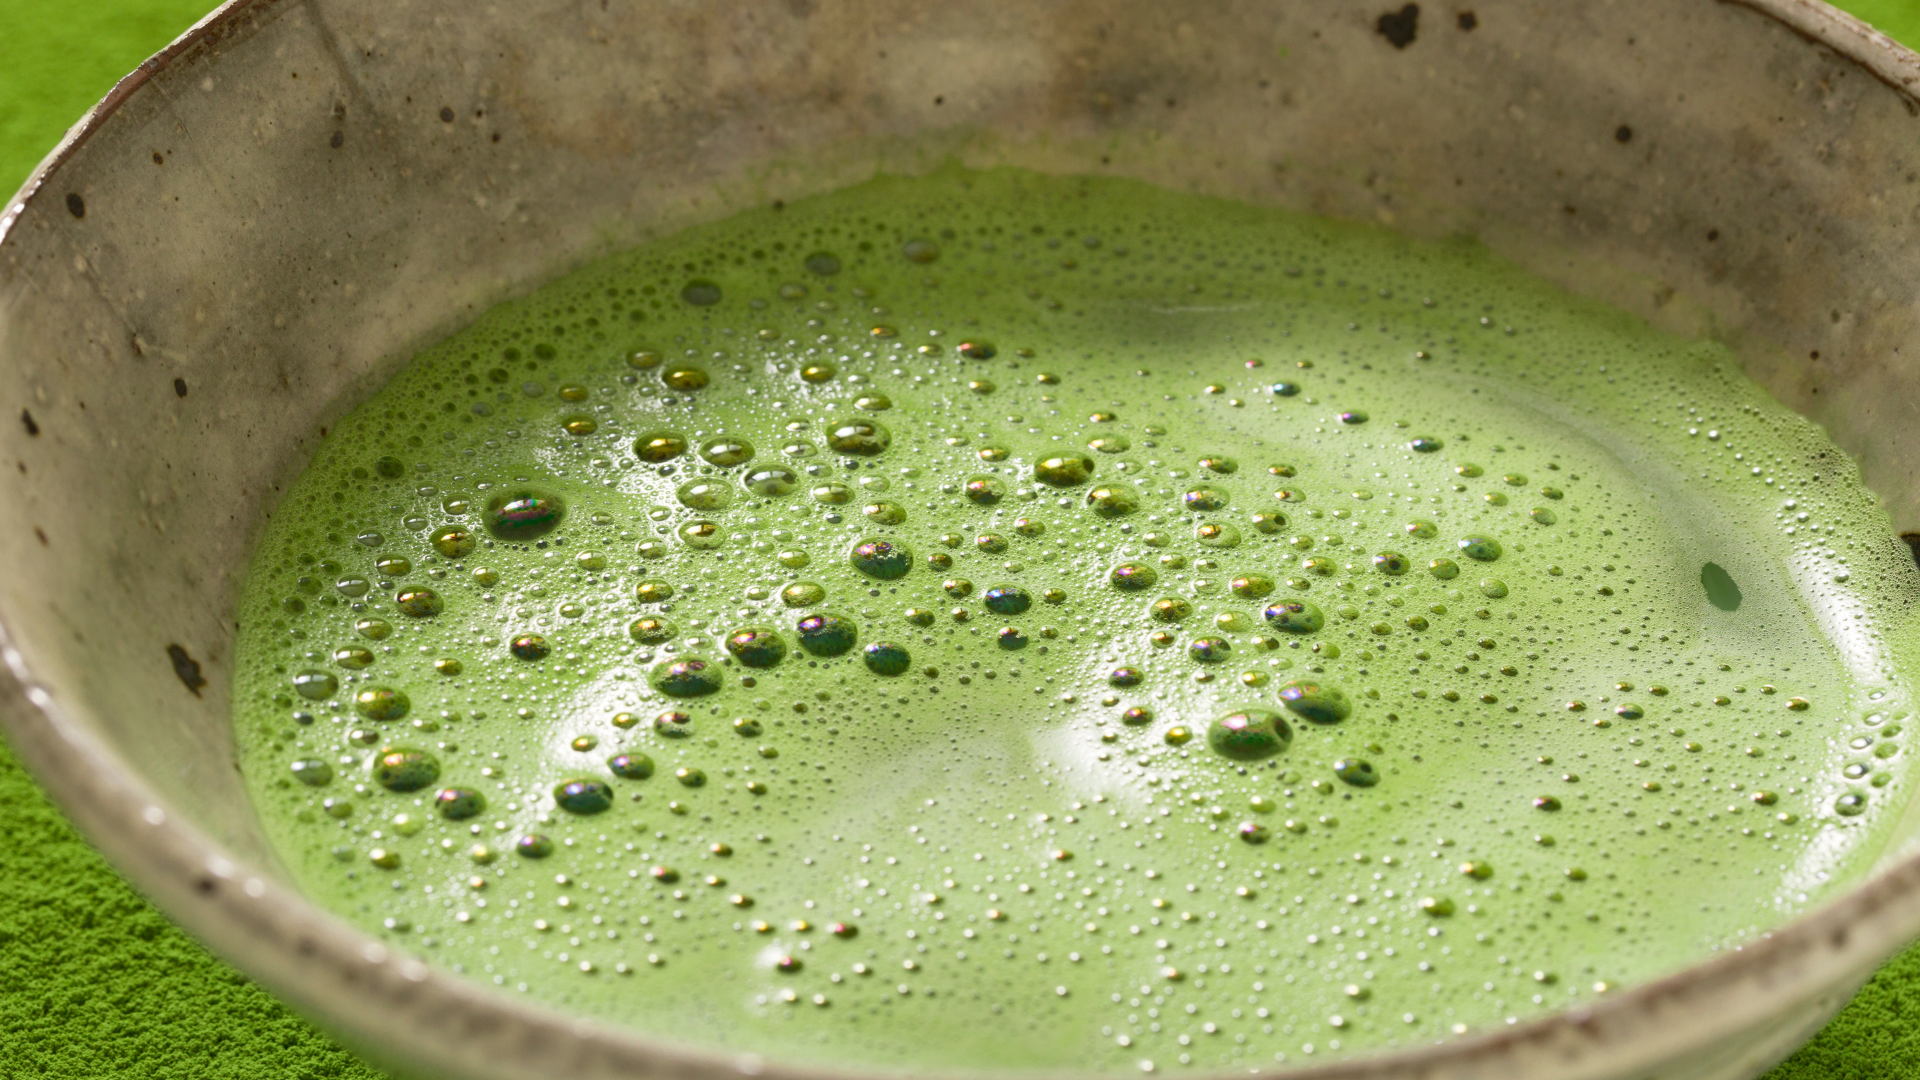 Bowl of matcha green tea with a frothy surface